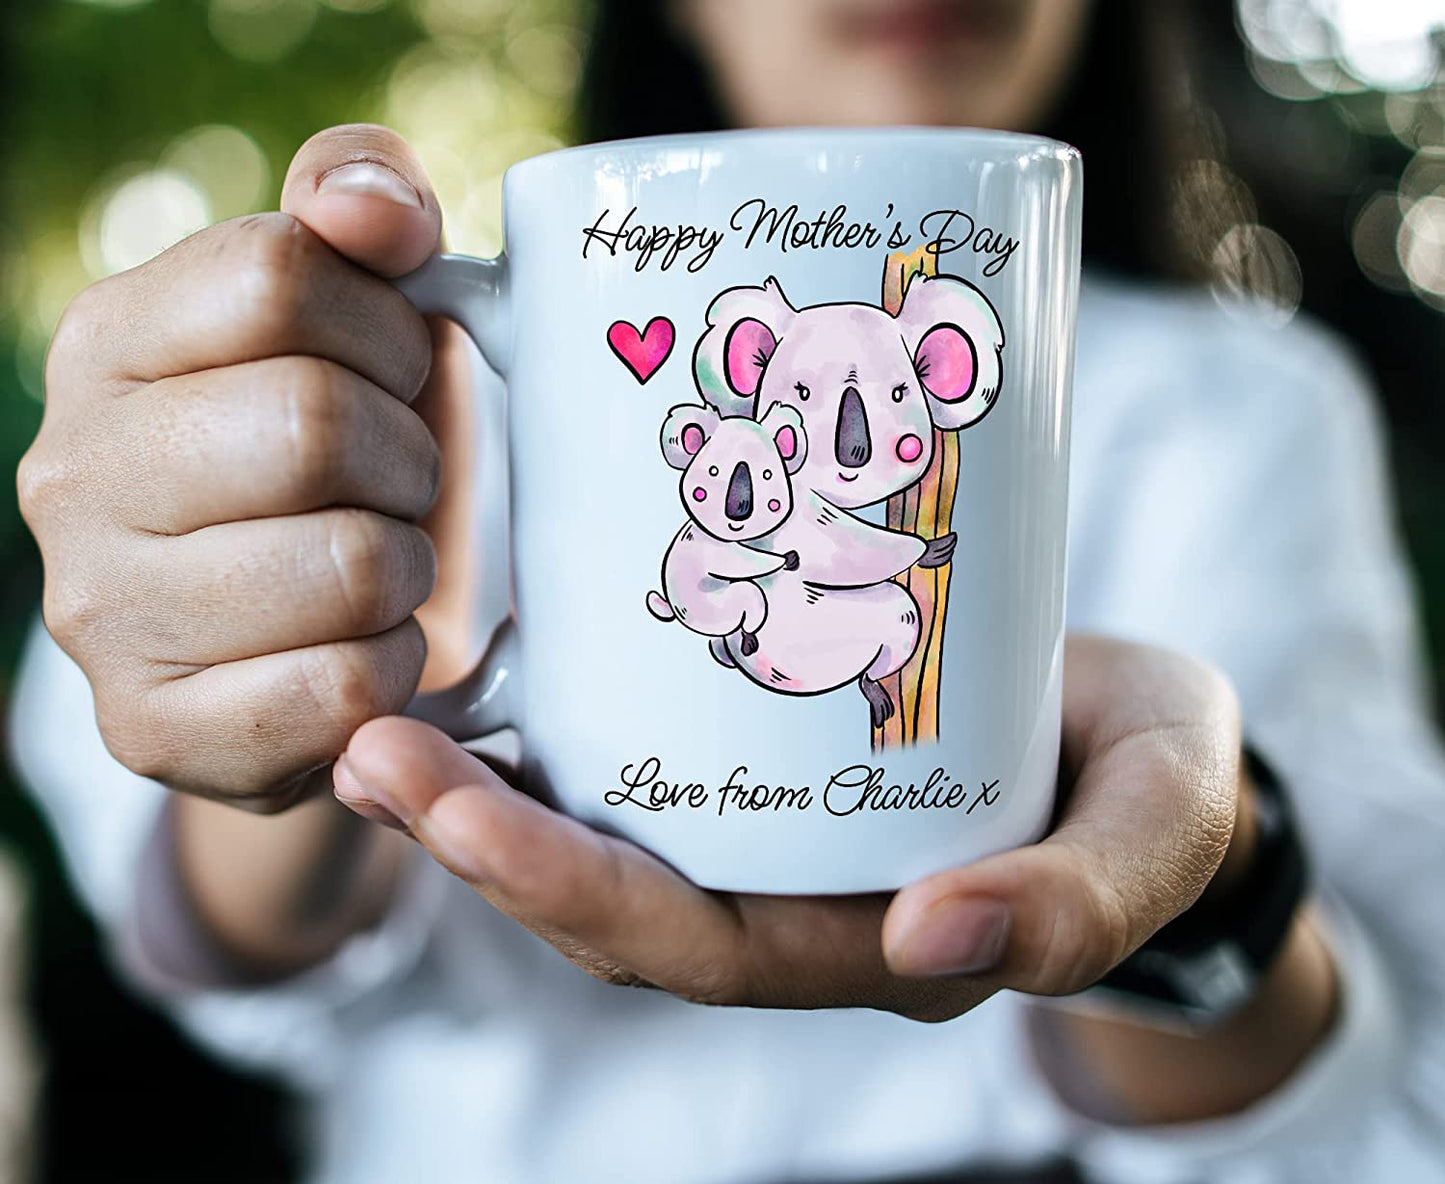 Koala Mother's Day or Birthday Coffee Mug / Tea Cup - Add any personalised message